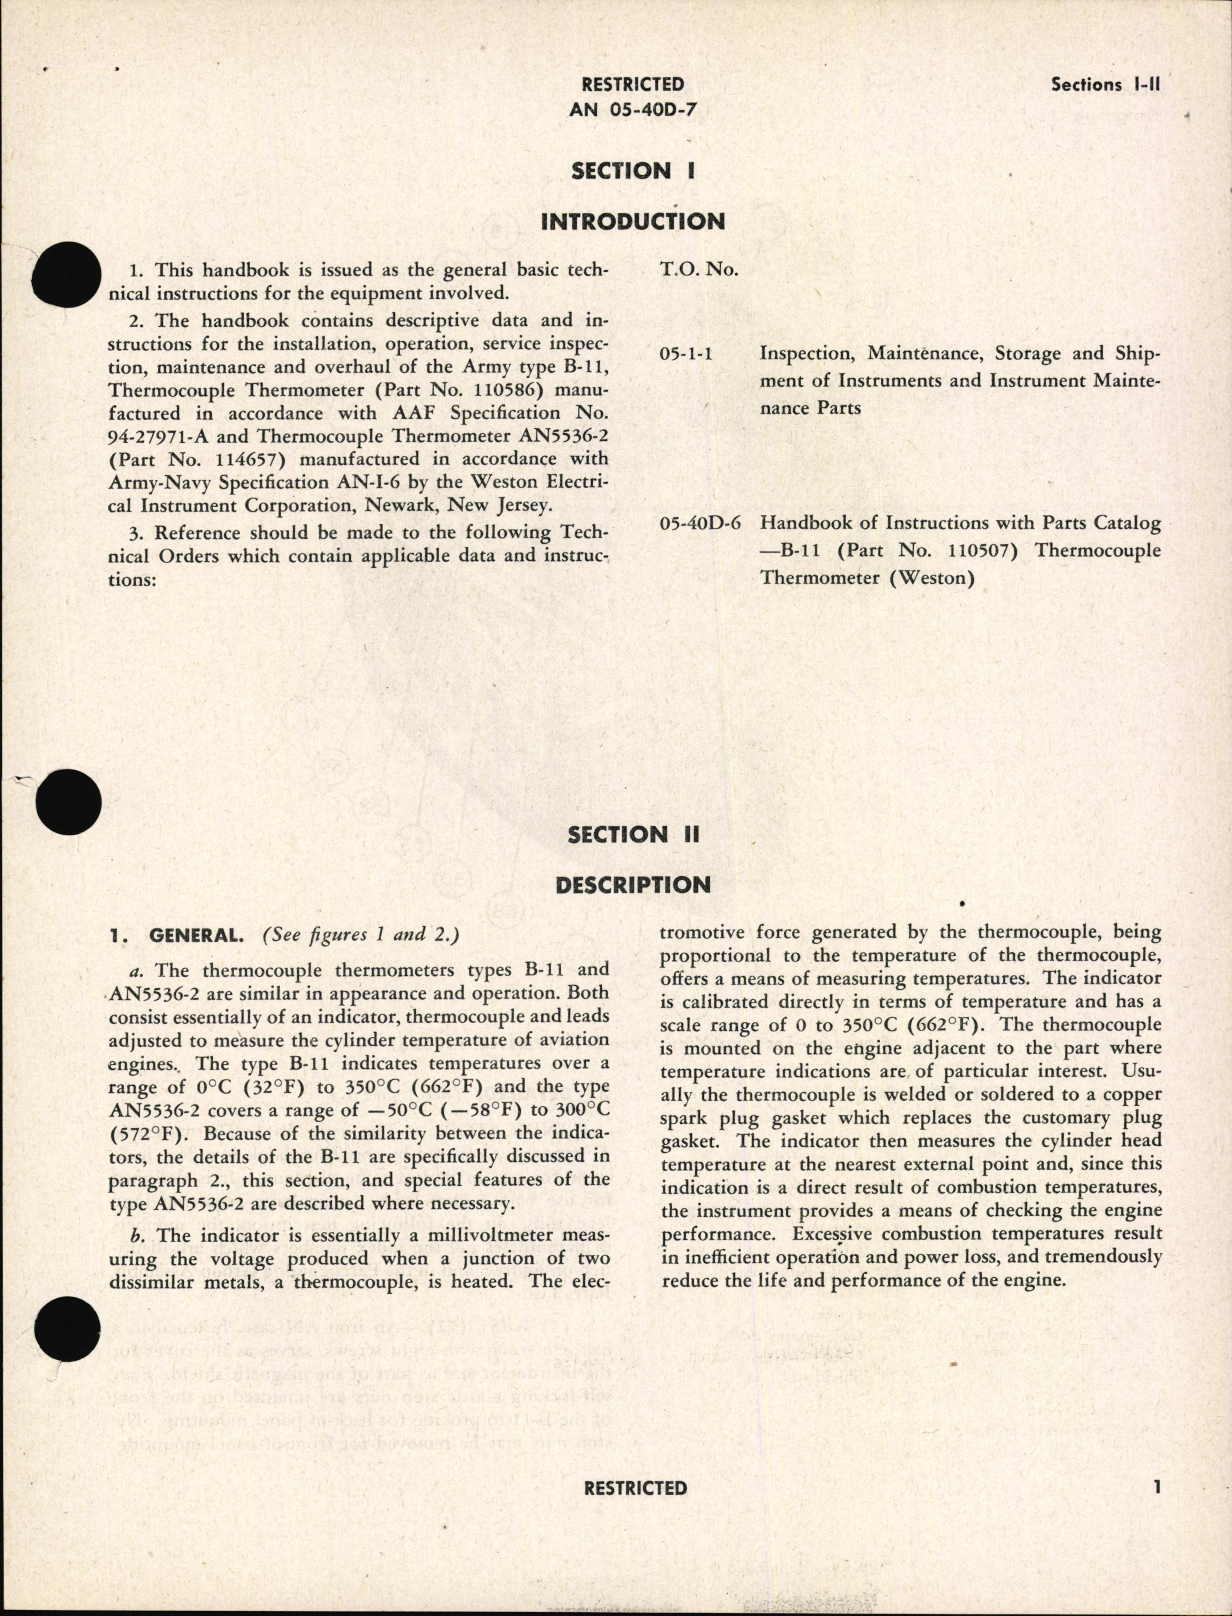 Sample page 5 from AirCorps Library document: Handbook of Instructions with Parts Catalog for Thermocouple Thermometers